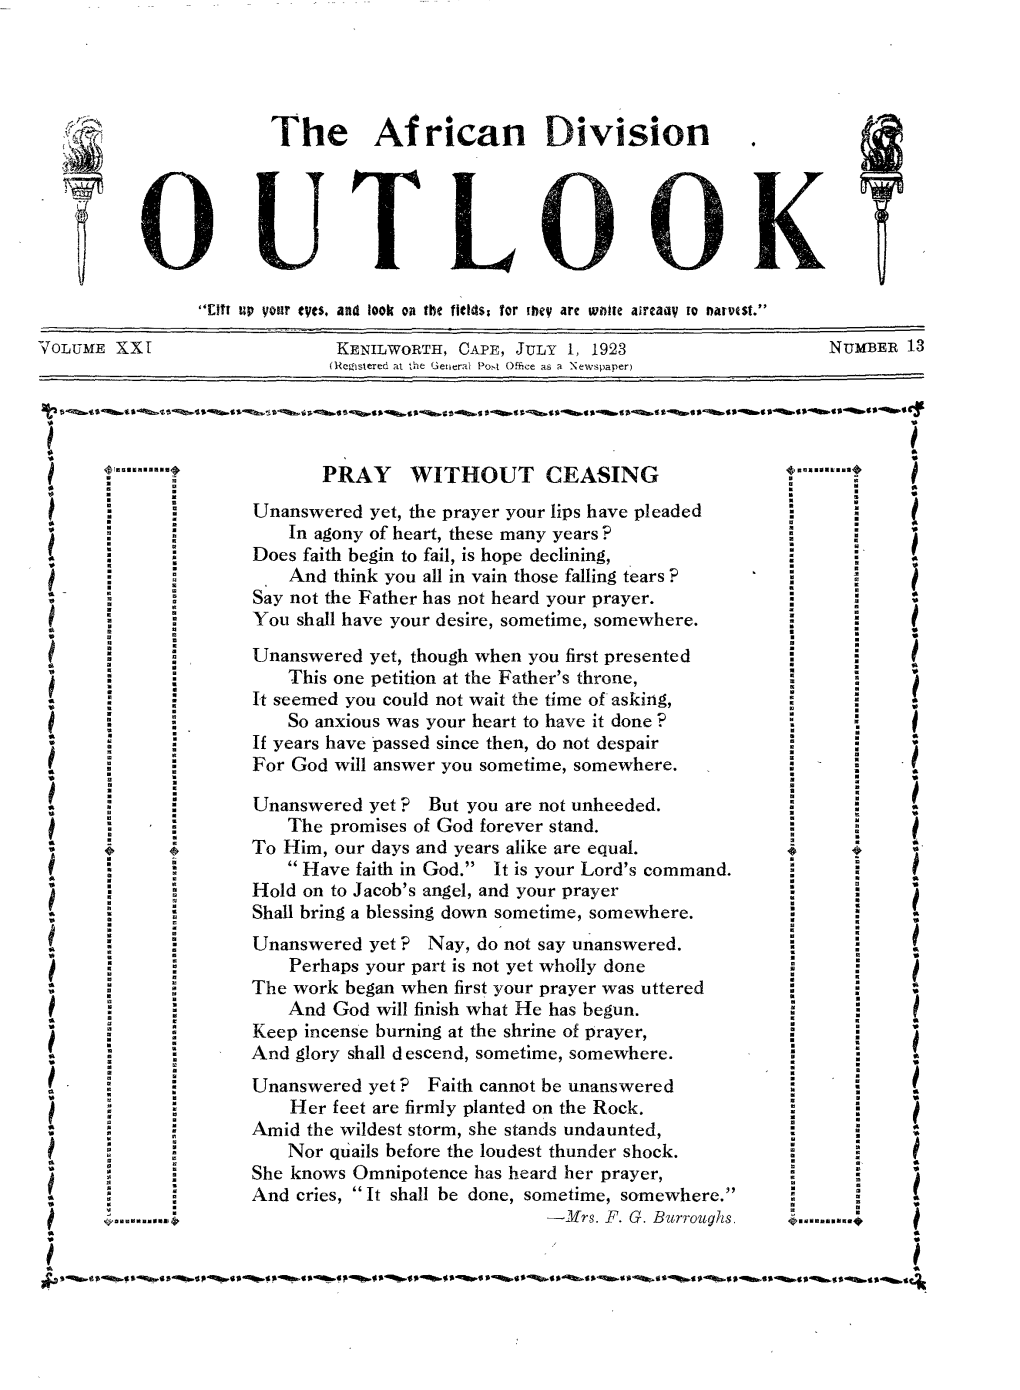 The African Division Outlook for 1923